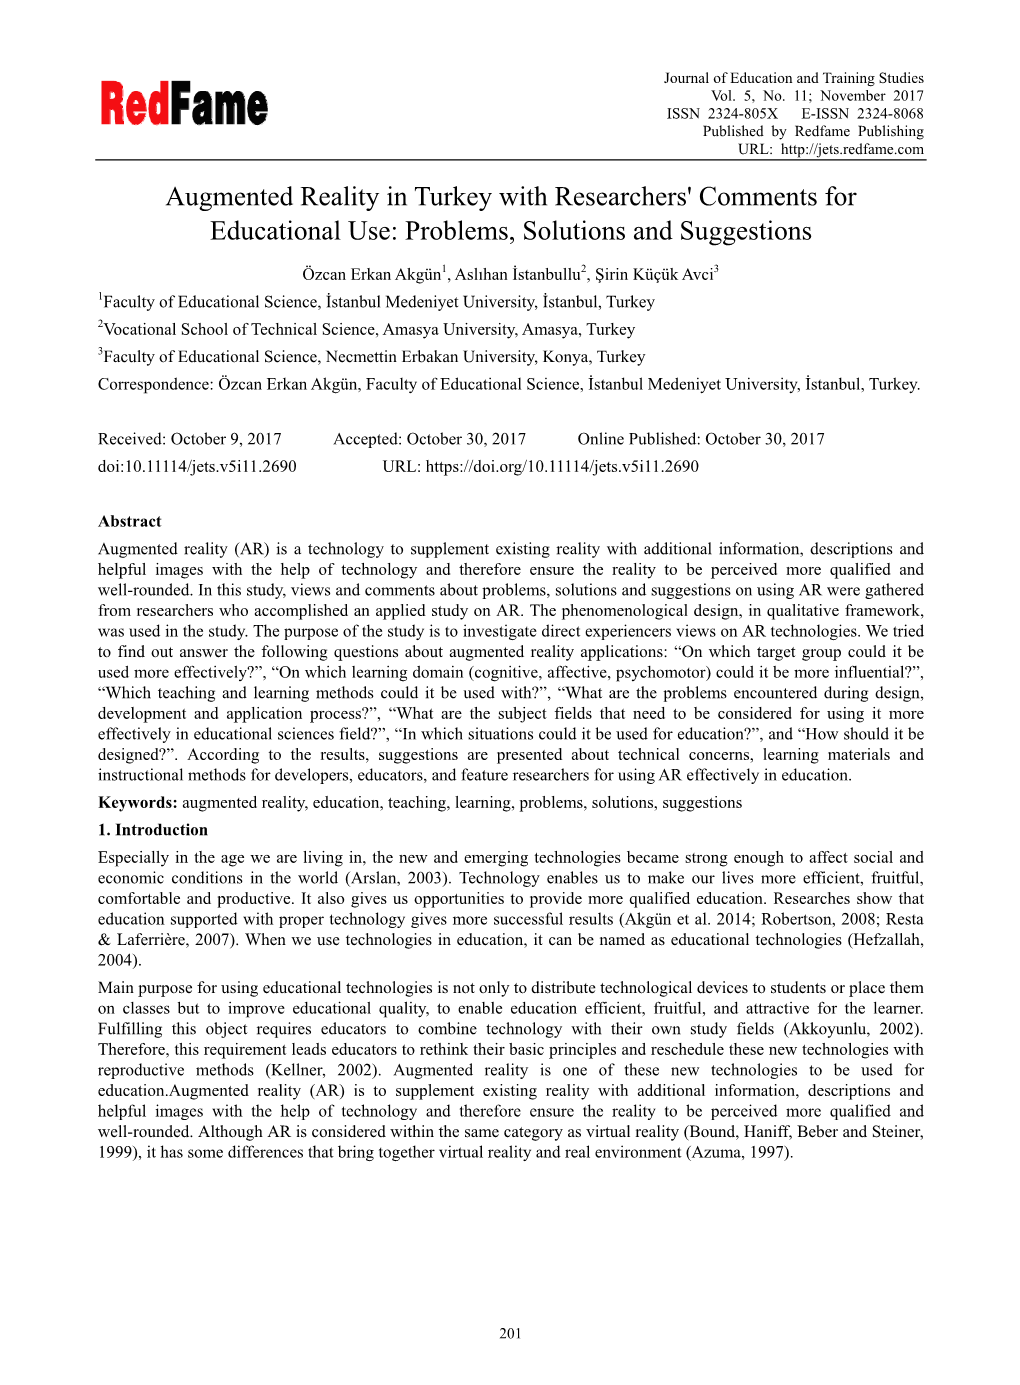 Augmented Reality in Turkey with Researchers' Comments for Educational Use: Problems, Solutions and Suggestions